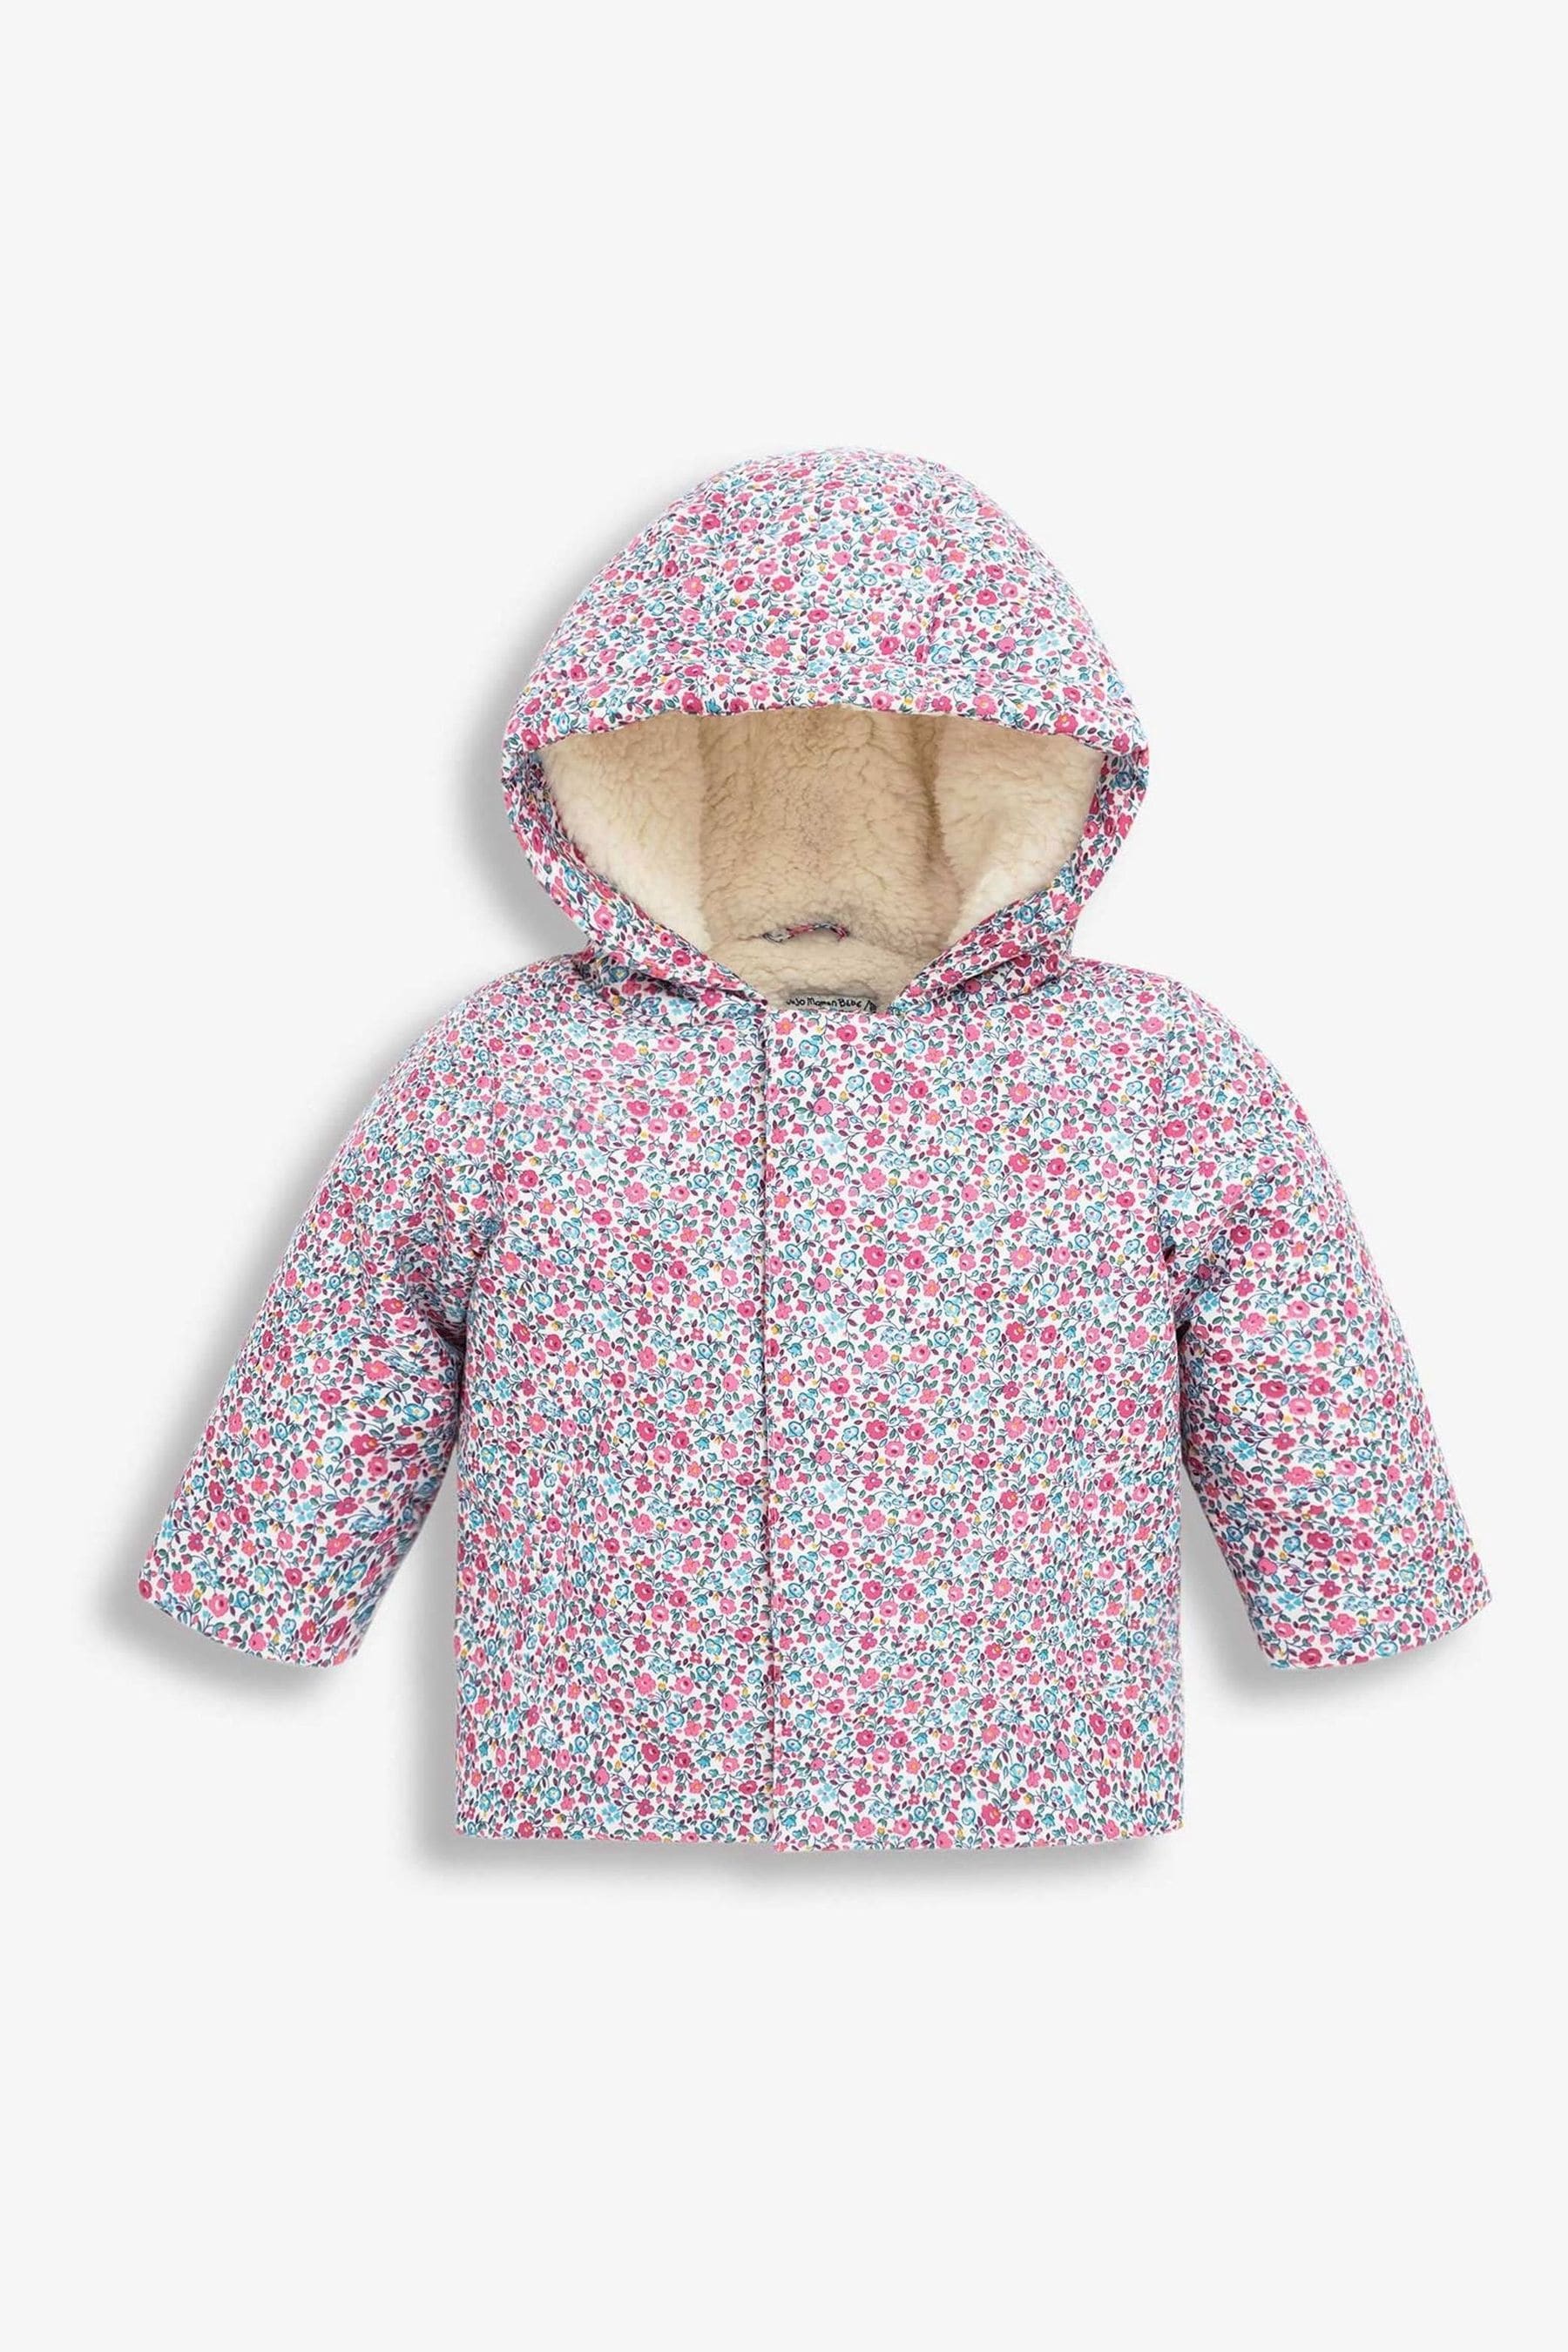 Buy JoJo Maman Bébé Ditsy Floral Baby Jacket from the Next UK online shop